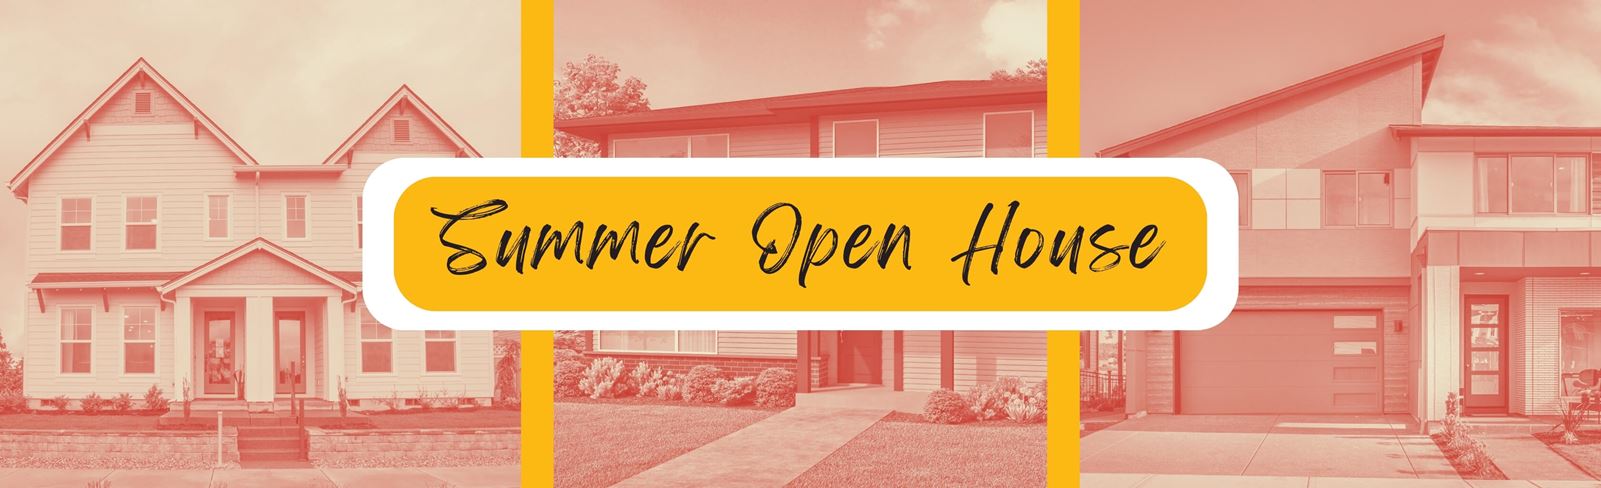 Reed's Crossing Summer Open House Event